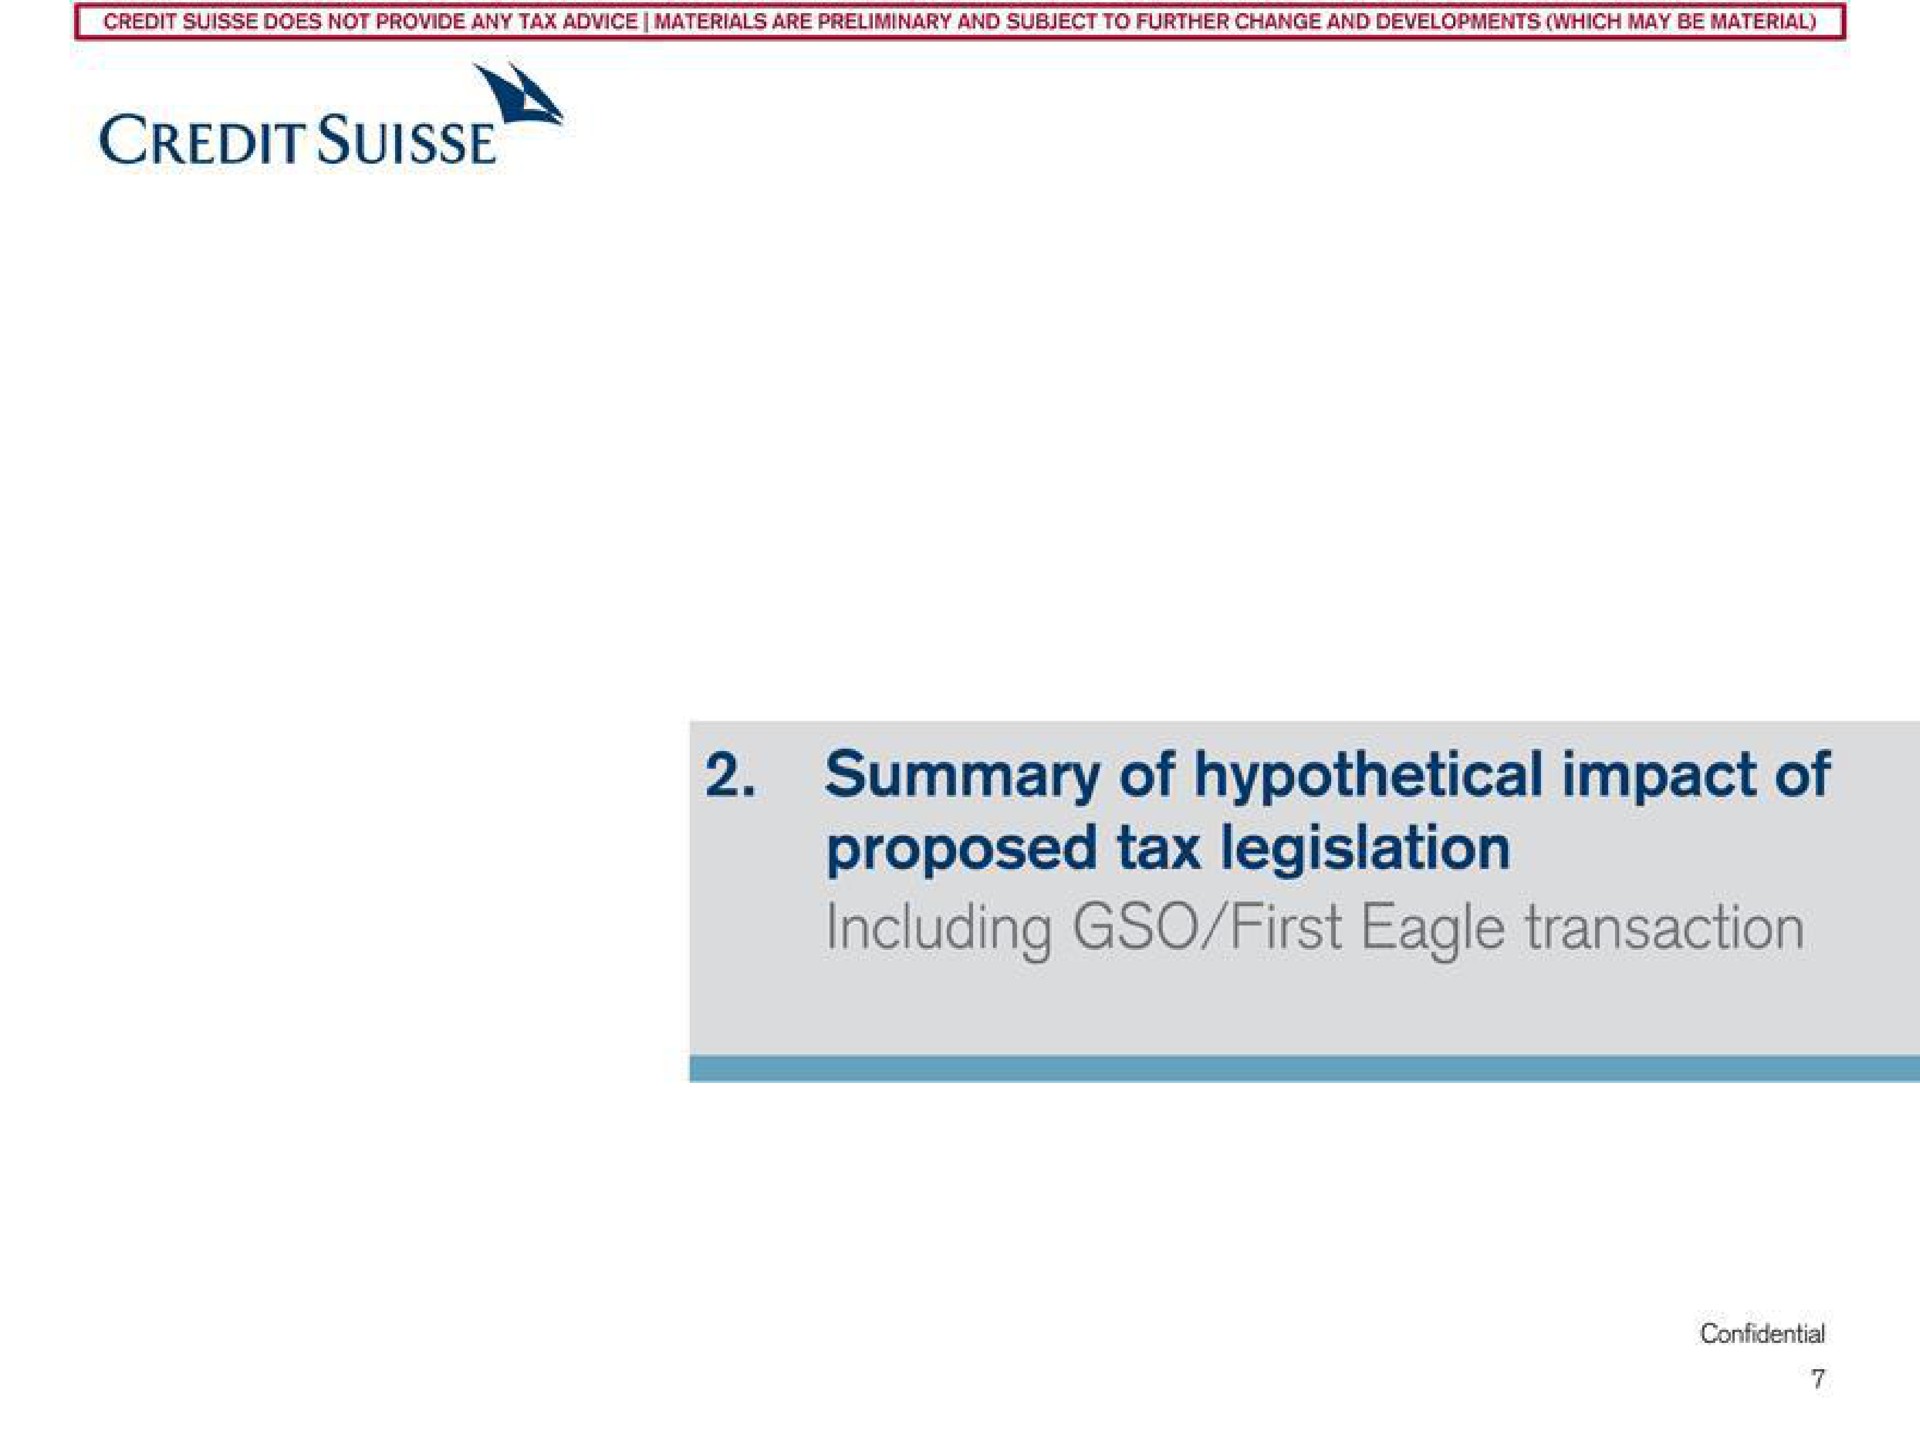 credit summary of hypothetical impact of proposed tax legislation including first eagle transaction | Credit Suisse